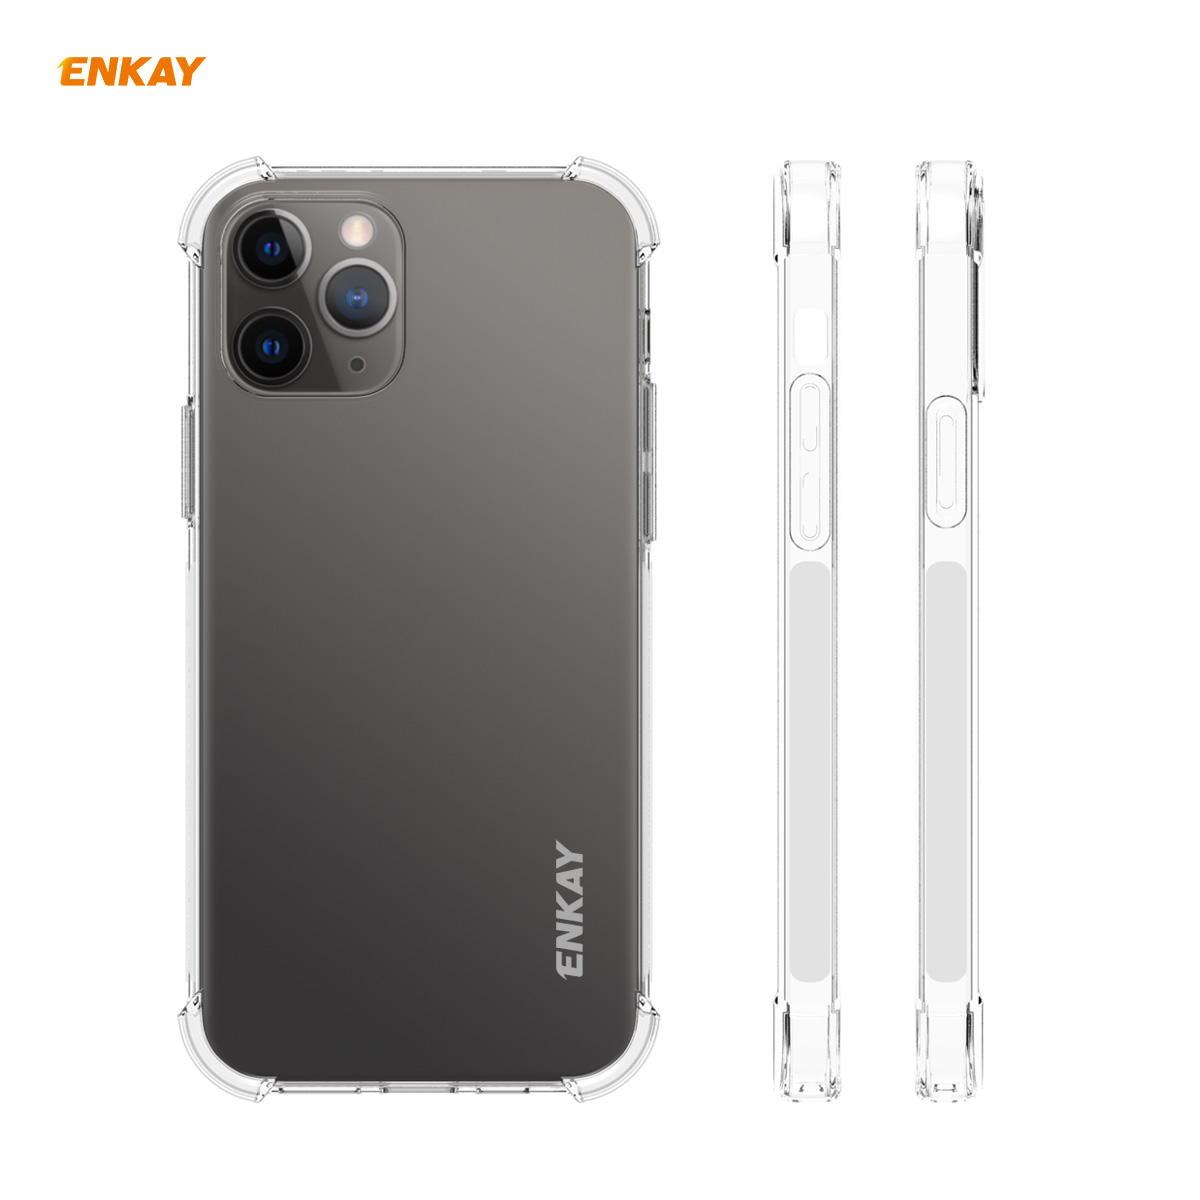 Enkay-2-in-1-for-iPhone-12-Pro--12-Accessories-with-Airbags-Non-Yellow-Transparent-TPU-Protective-Ca-1770210-9